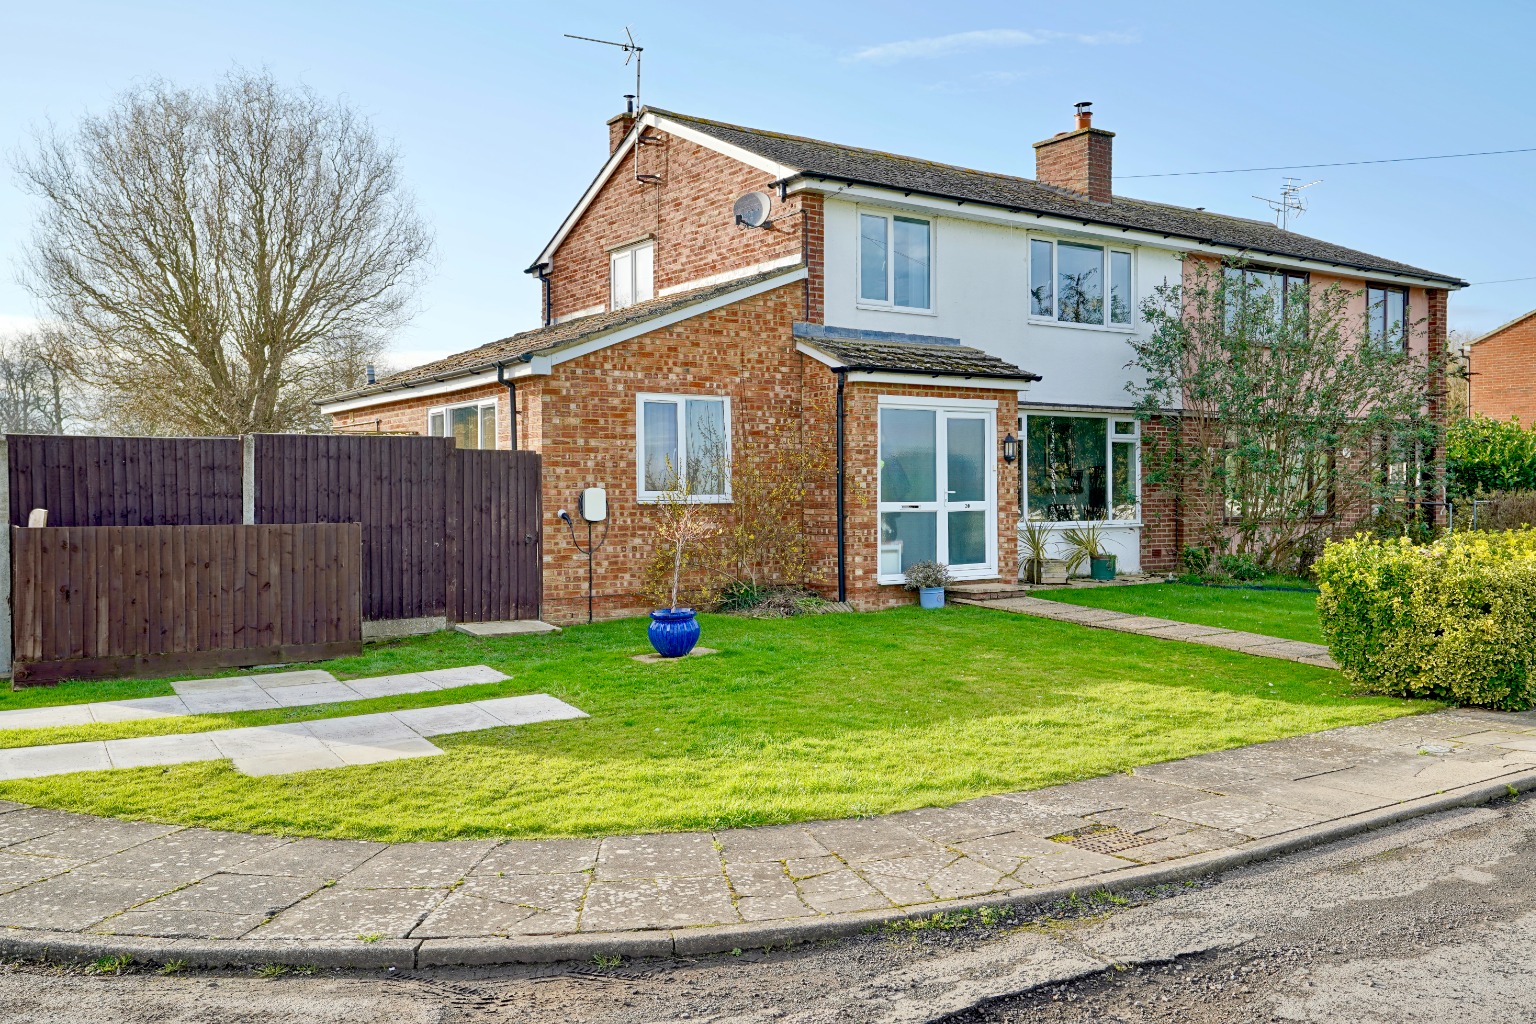 3 bed semi-detached house for sale in Roman Way, Huntingdon - Property Image 1